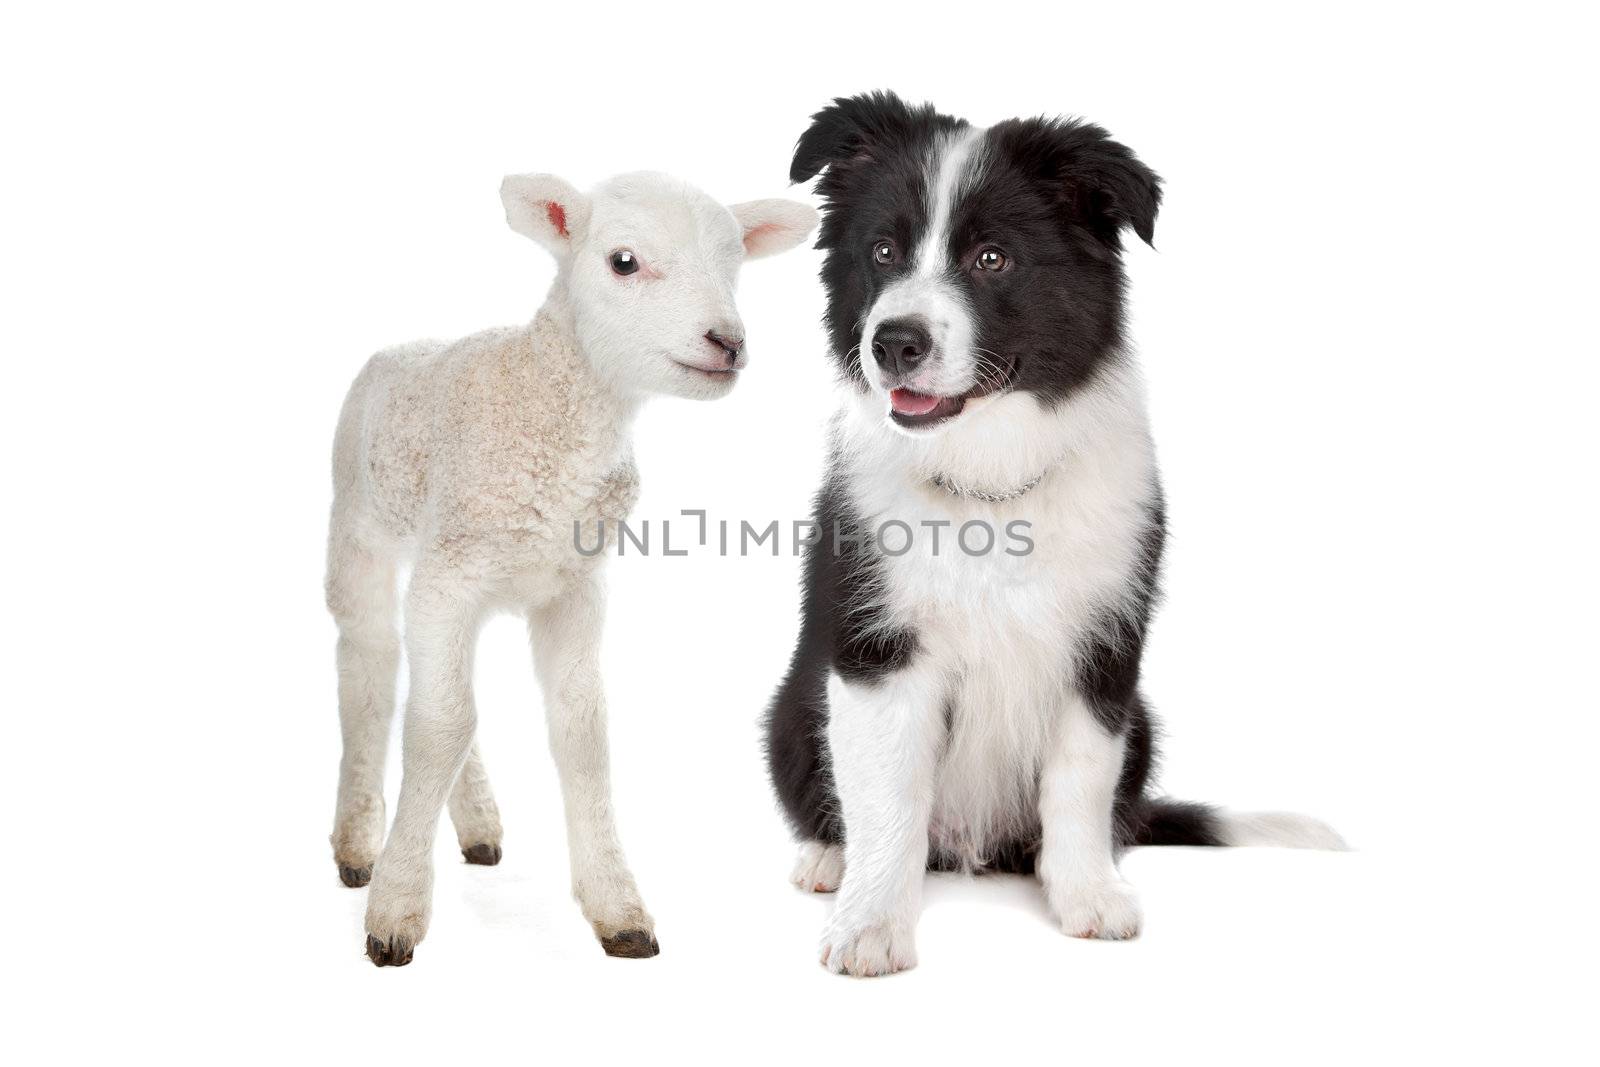 Lamb and a border collie puppy in front of a white background